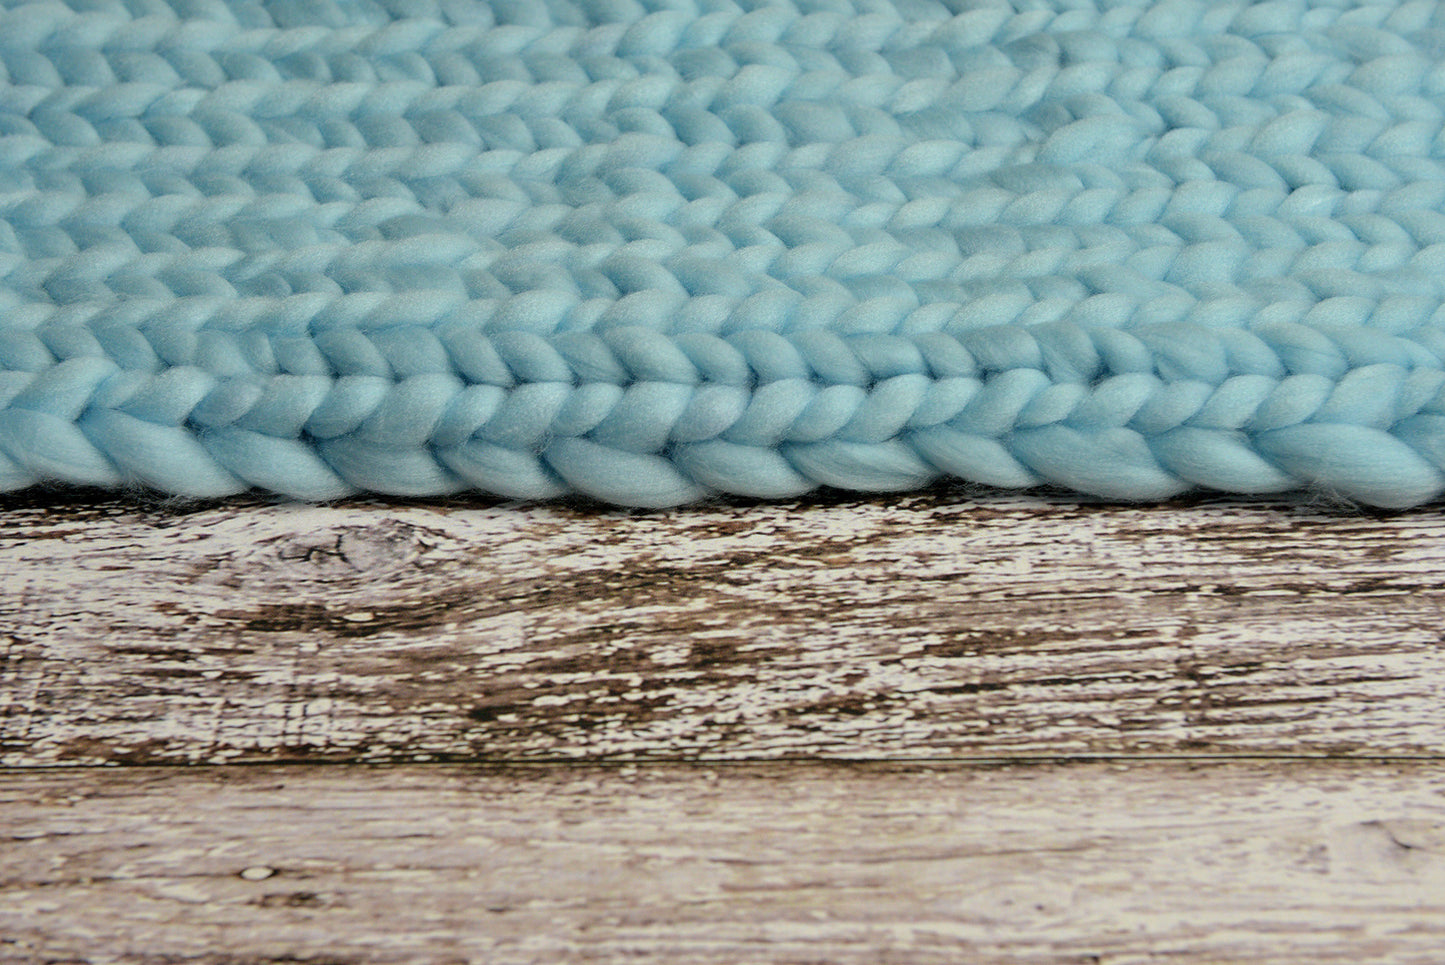 Knitted Thick Yarn Blanket - Aquamarine Blue-Newborn Photography Props